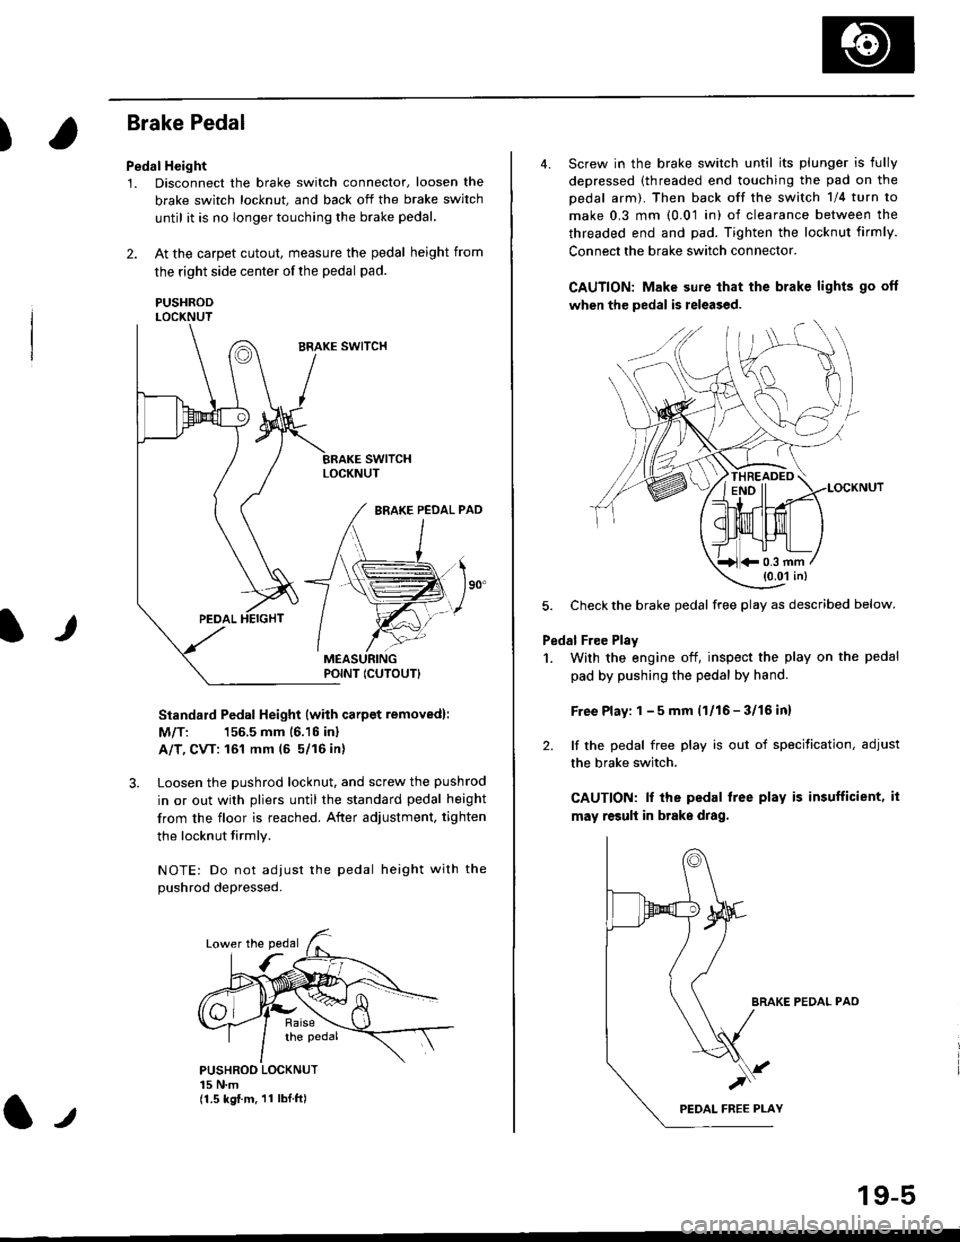 HONDA CIVIC 1999 6.G Workshop Manual )
Brake Pedal
Pedal Height
1. Disconnect the brake switch connector, loosen the
brake switch locknut, and back off the brake switch
until it is no longer touching the brake pedal,
2. At the carpet cut